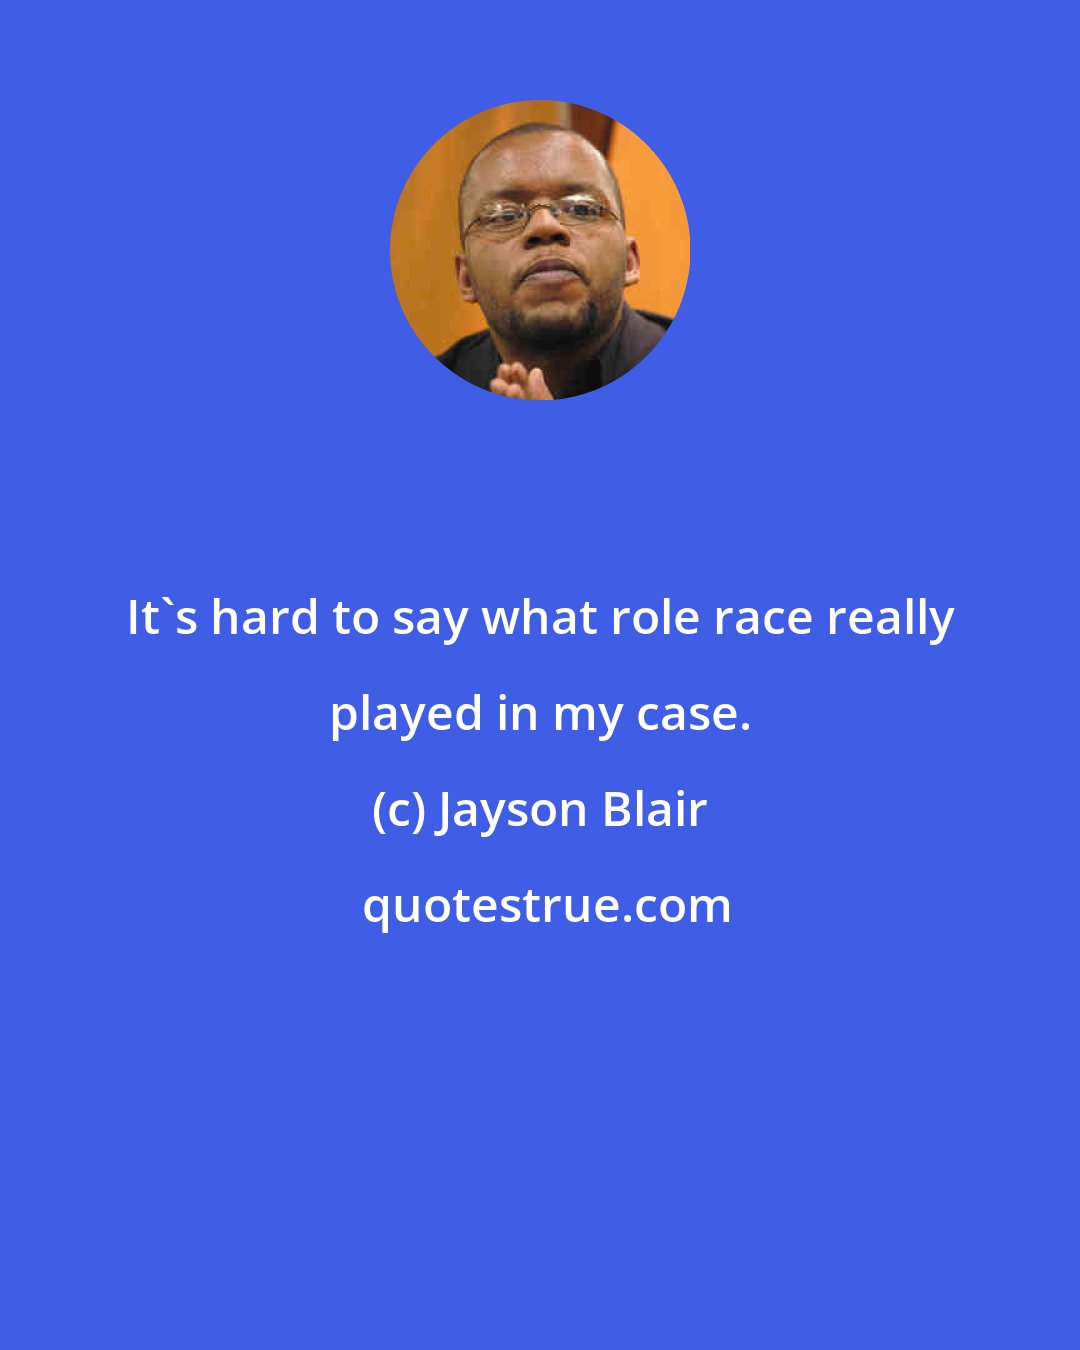 Jayson Blair: It's hard to say what role race really played in my case.